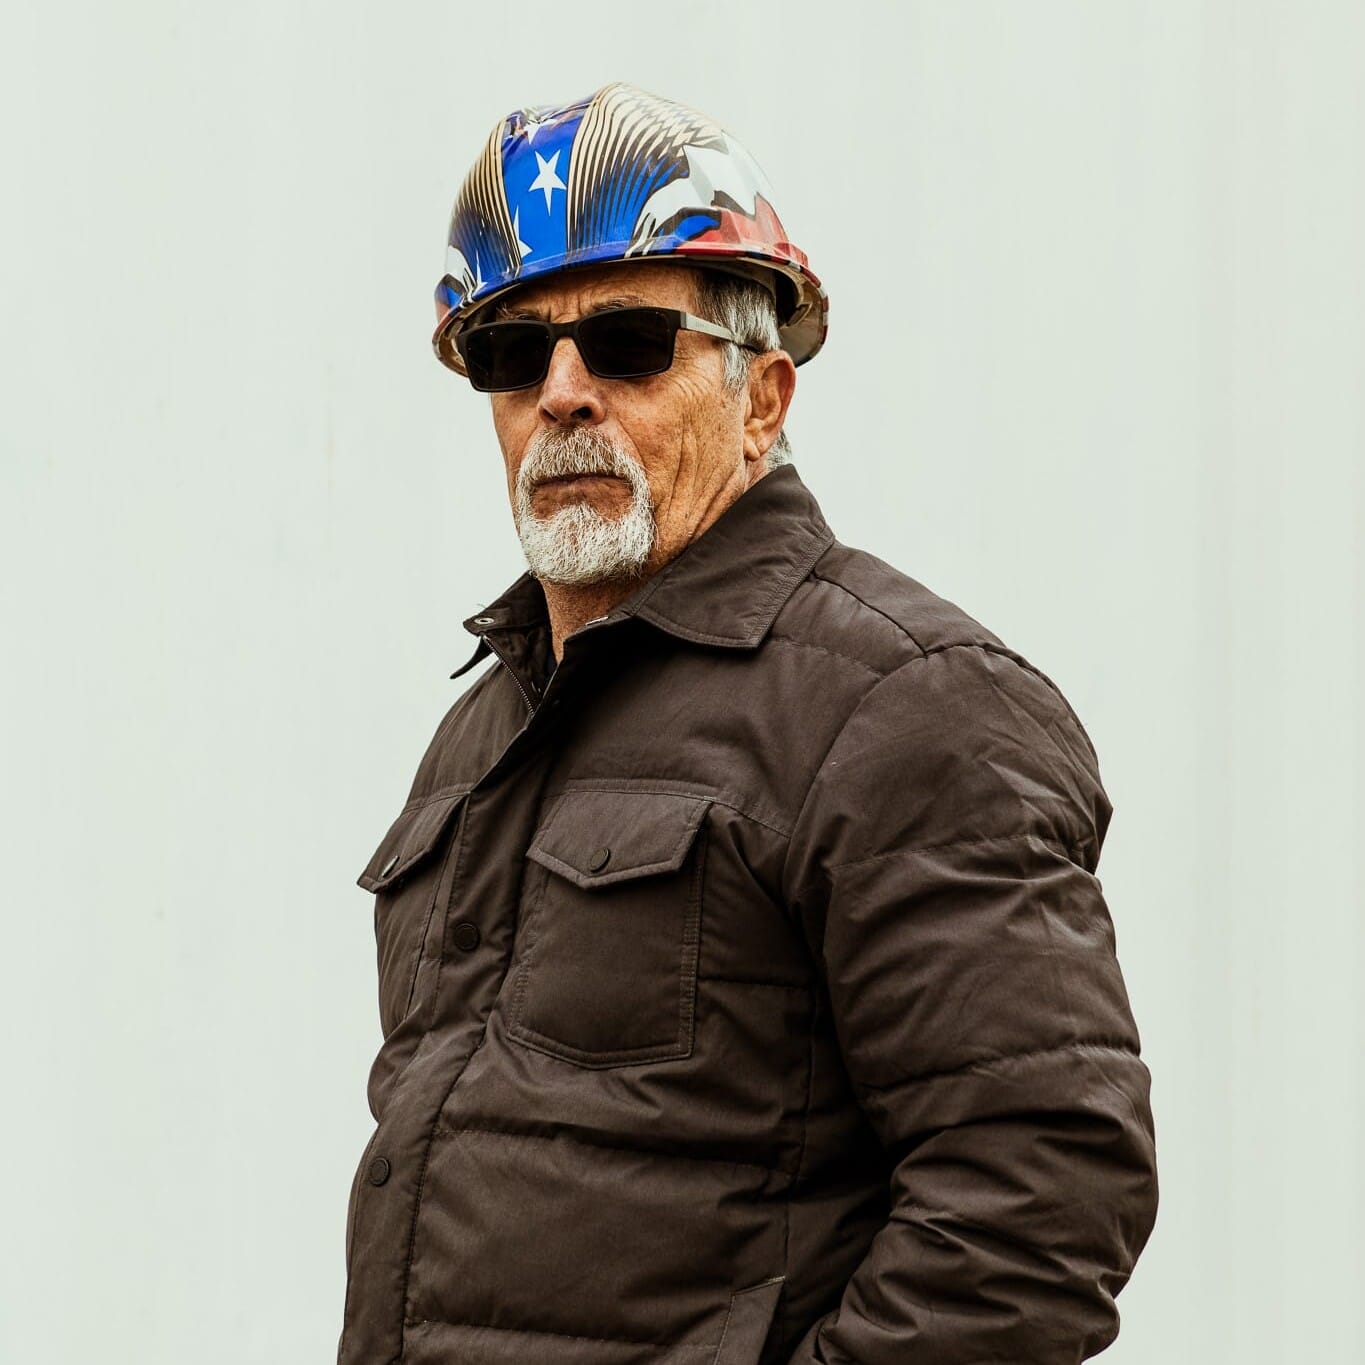 An older man, a Seattle Floating Homes contractor, wearing a hard hat and jacket.